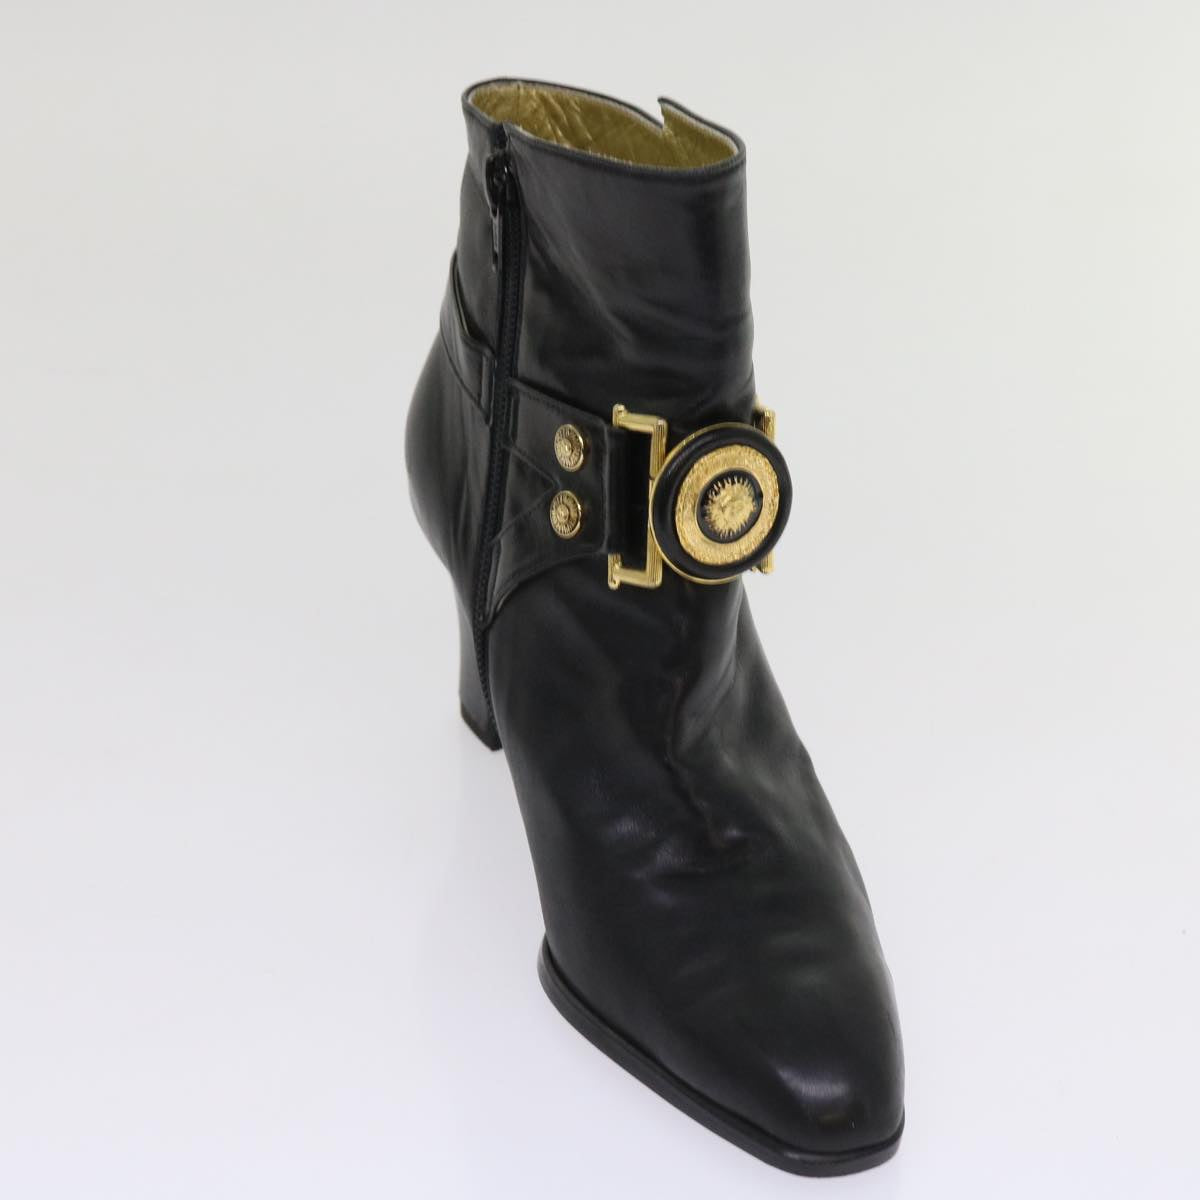 VERSACE Boots Leather 36 Black Auth hk1043